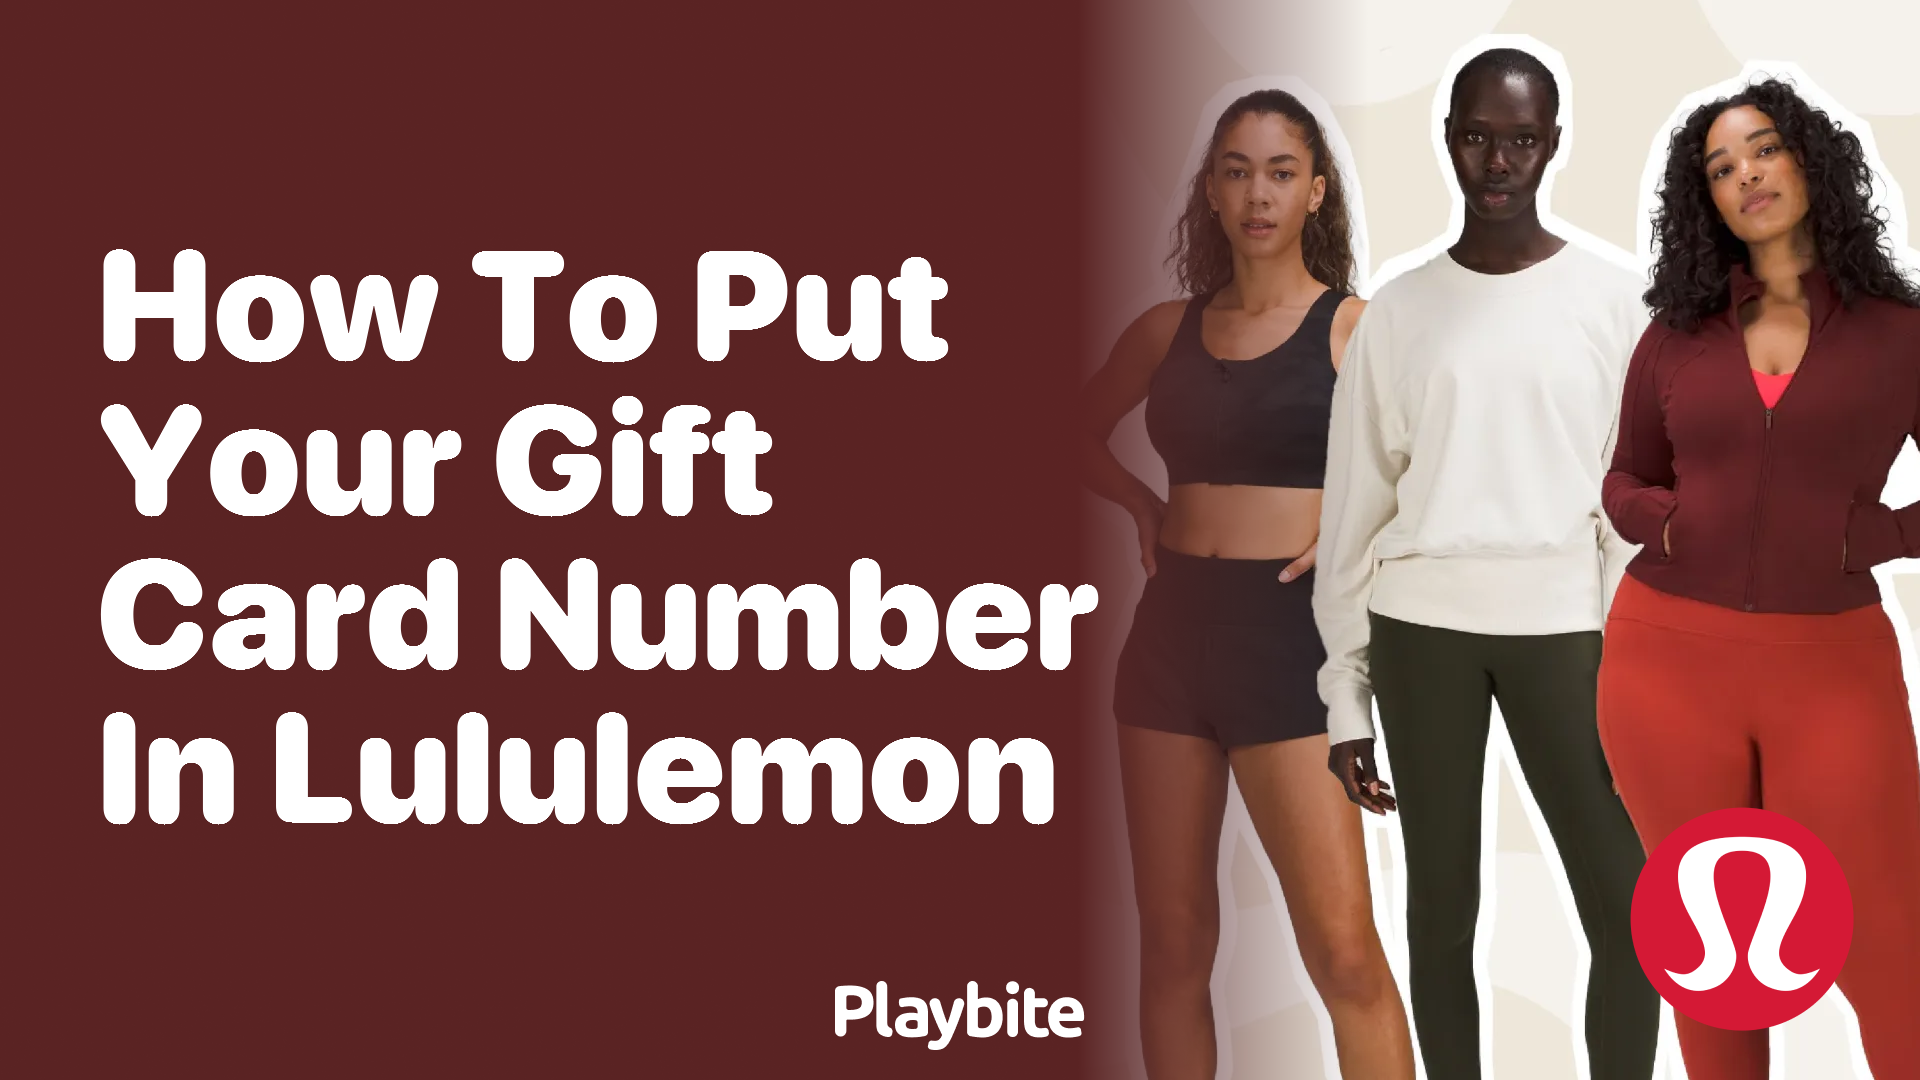 How to Put Your Gift Card Number in Lululemon - Playbite